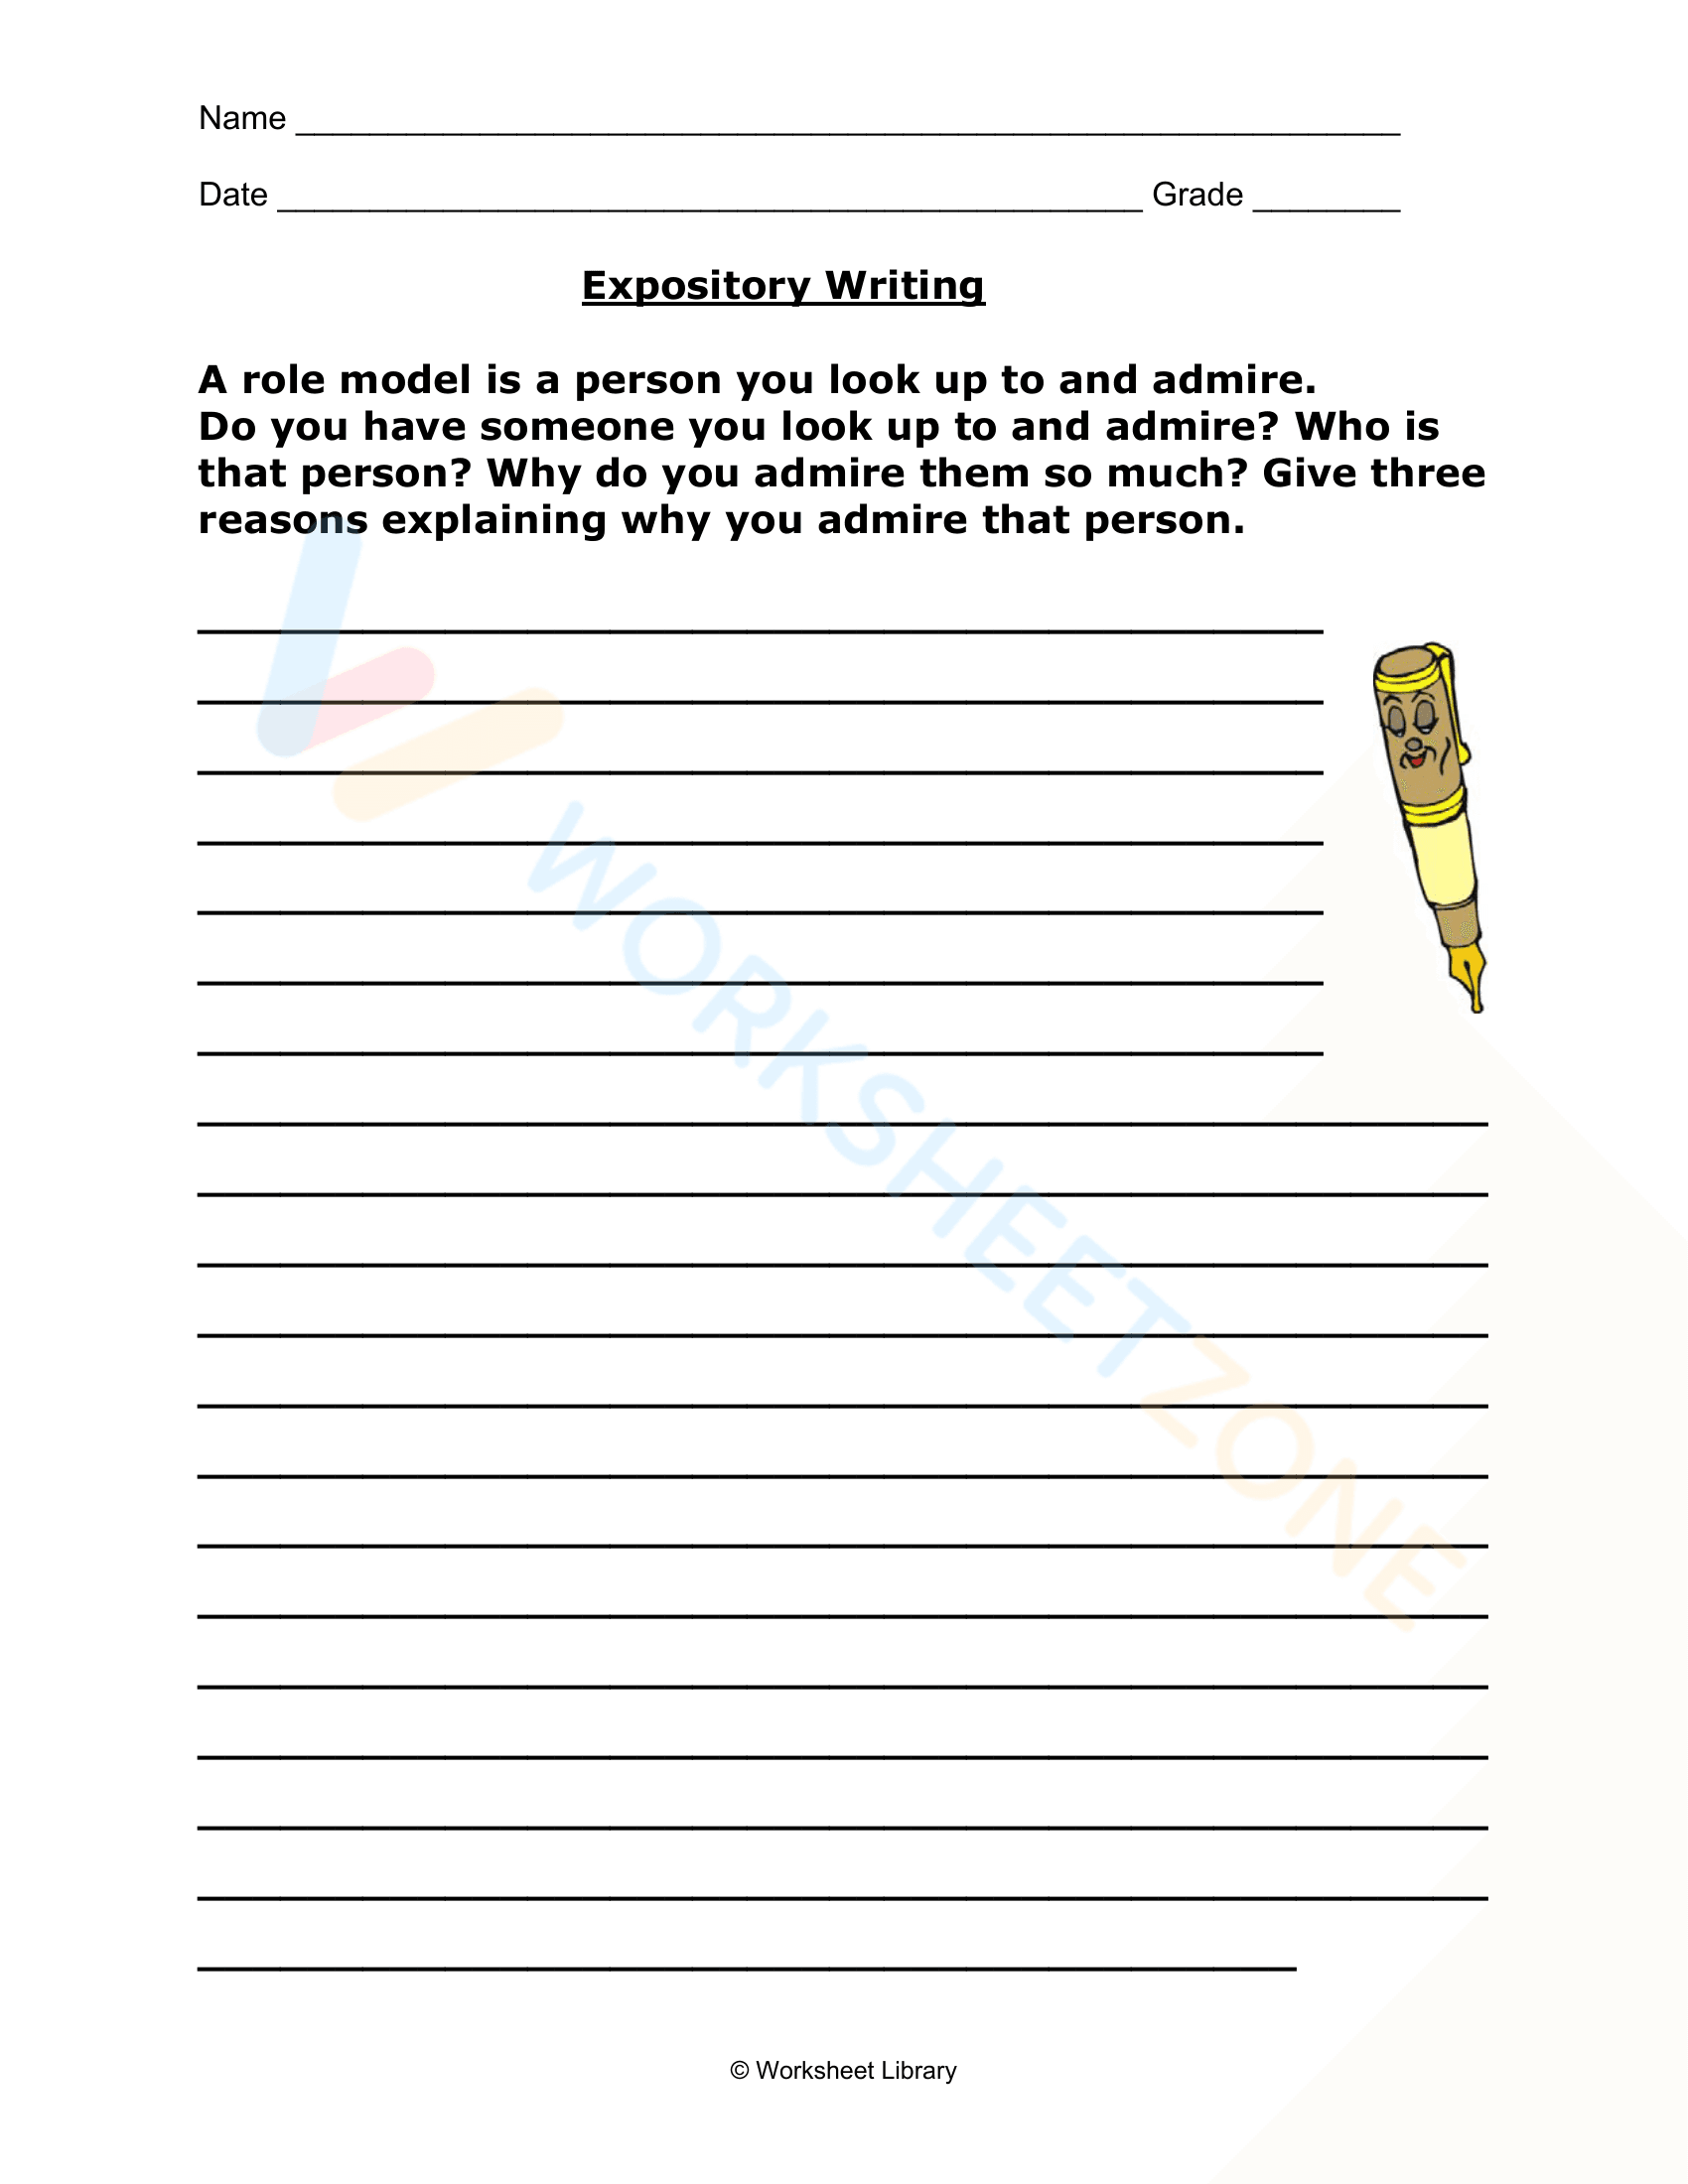 expository writing worksheets pdf 10